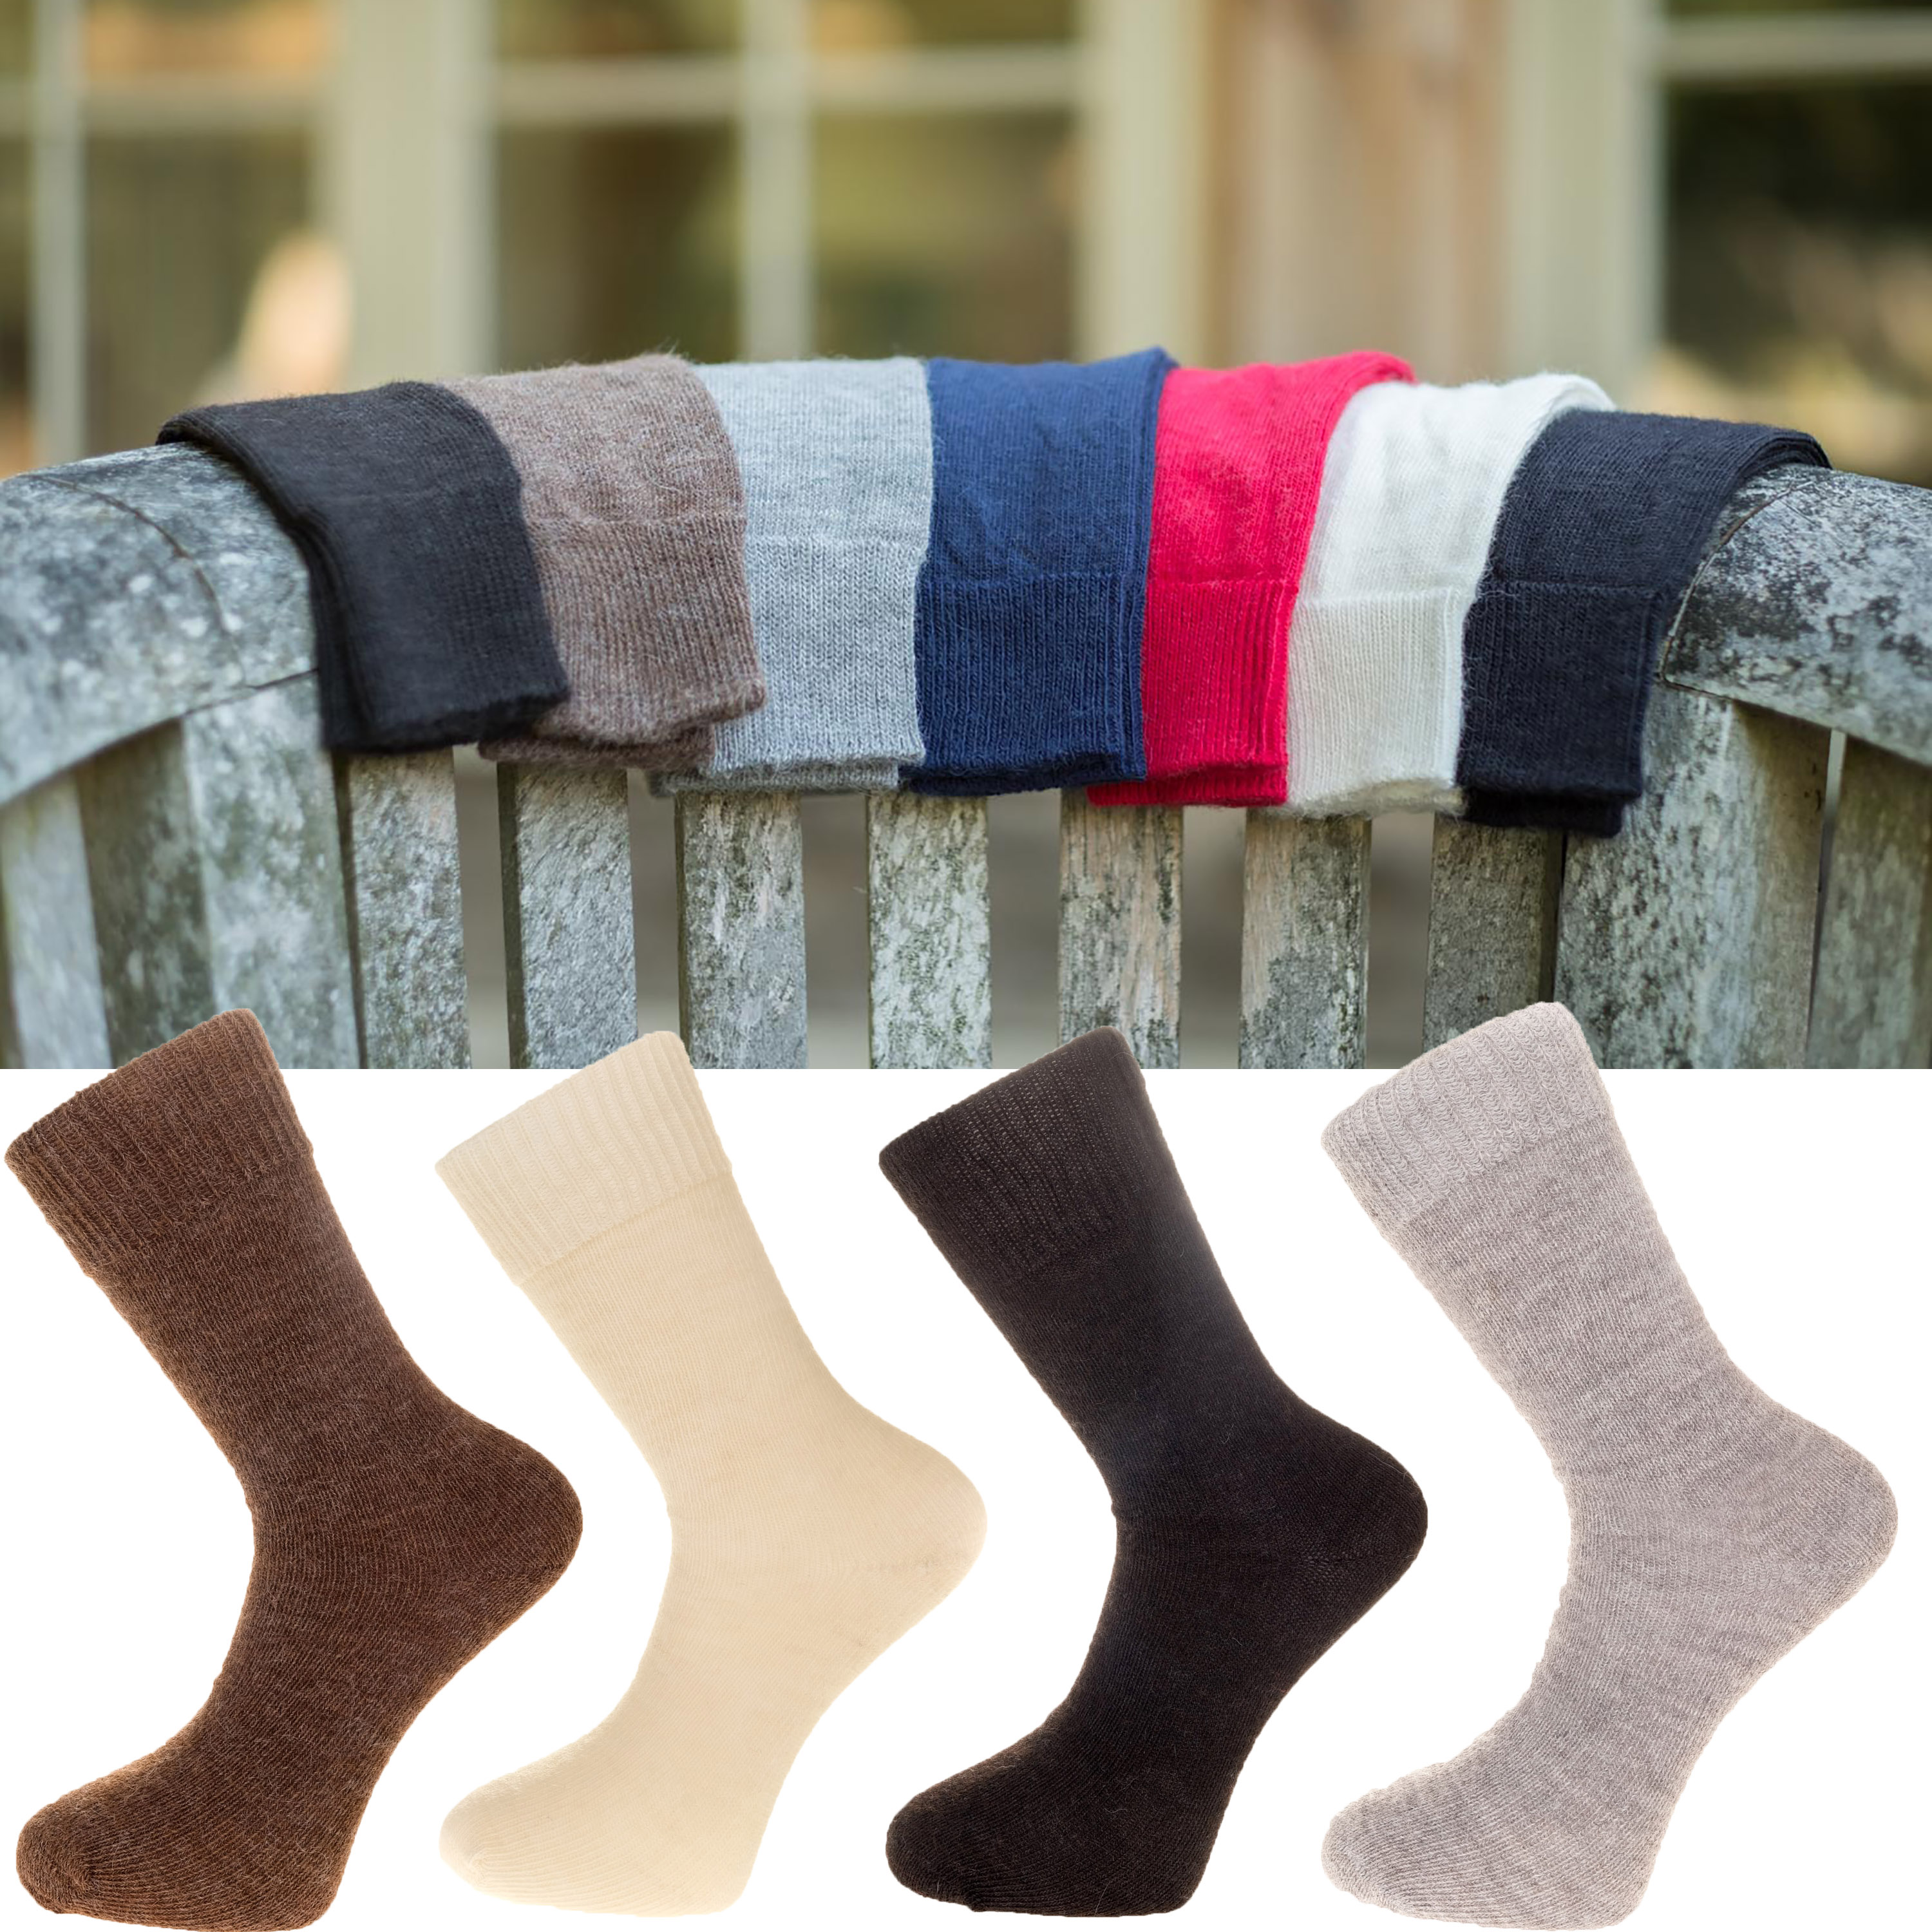 The Alpaca Every Day Socks in 4 natural colours